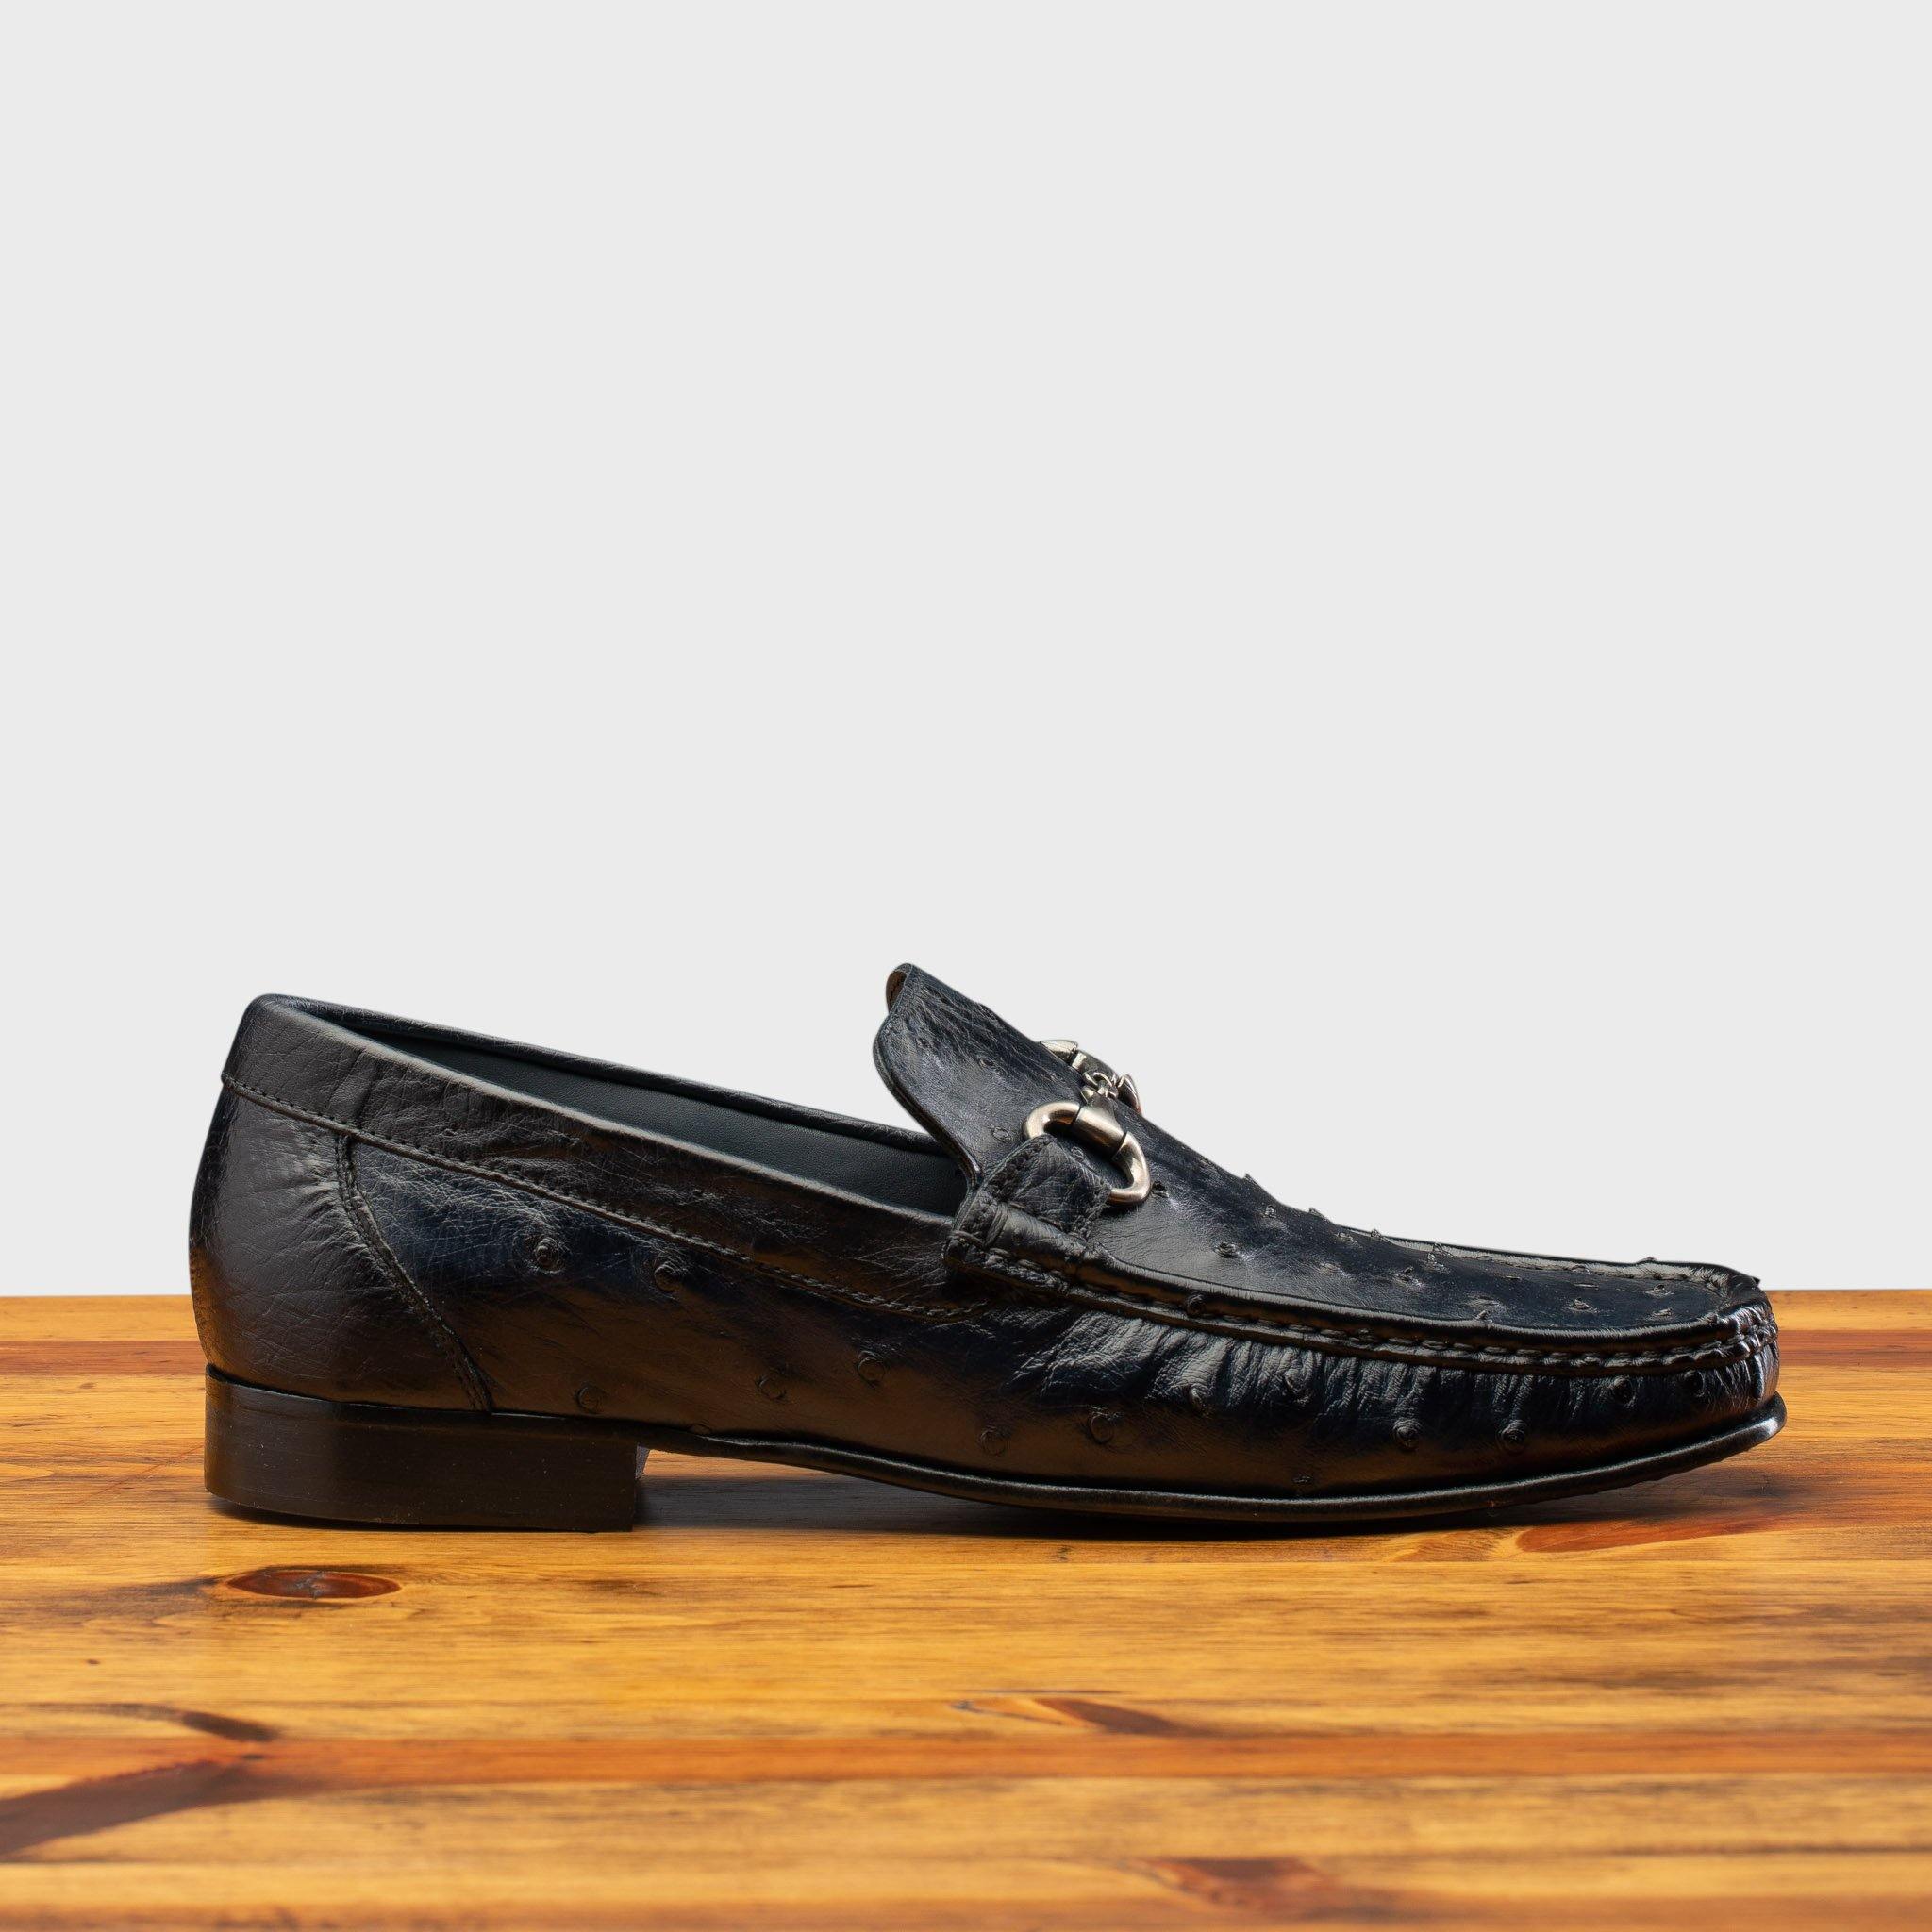 Side profile of the 3238-M Calzoleria Toscana Ostrich Dress Slip-On on top of a wooden table